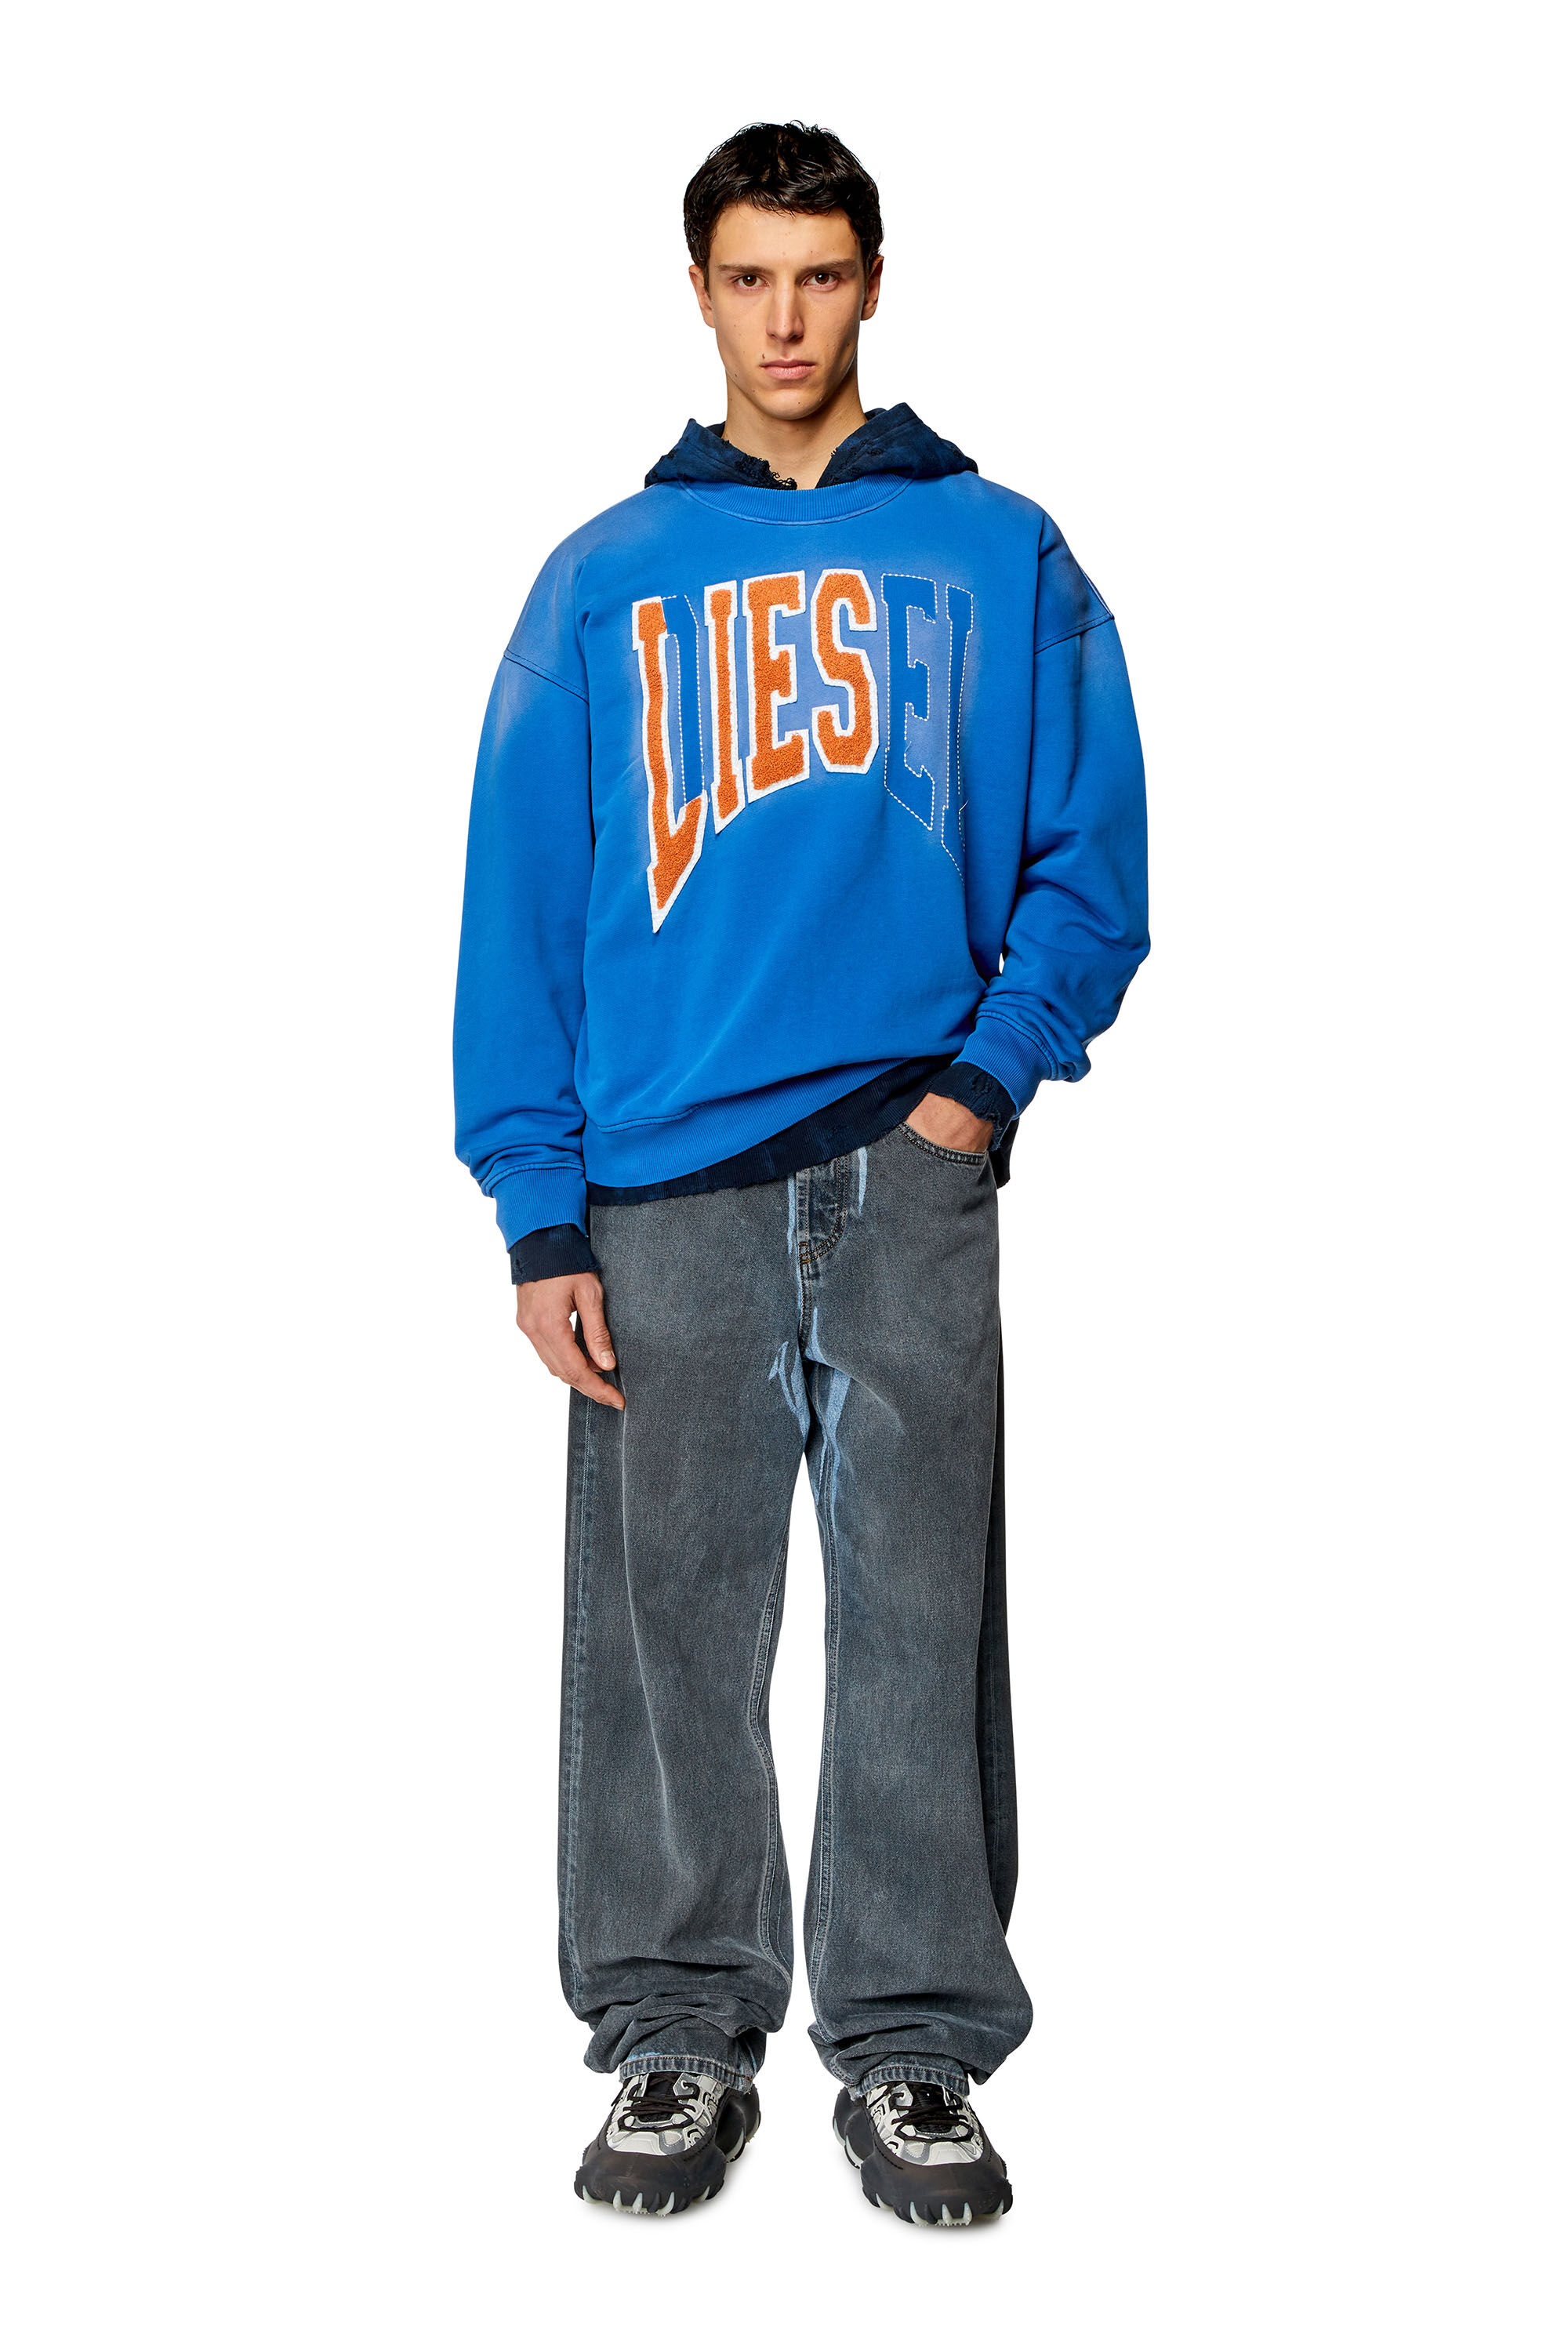 Diesel - S-BOXT-N6, Man College sweatshirt with LIES patches in Blue - Image 1